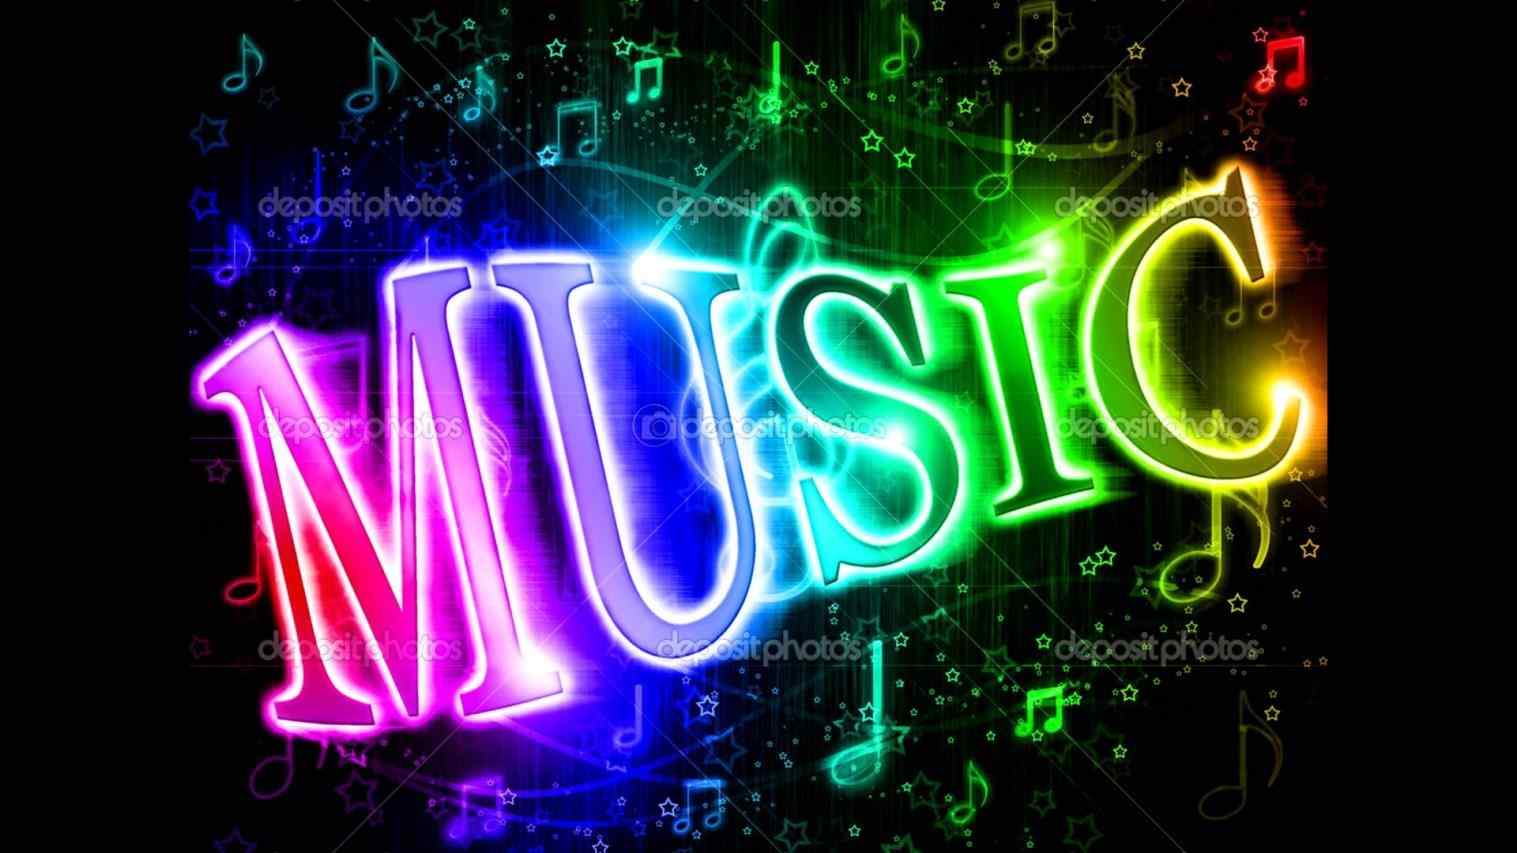 Music Best HD Cool Neon Background Free Dj Wallpaper Picture Of Music